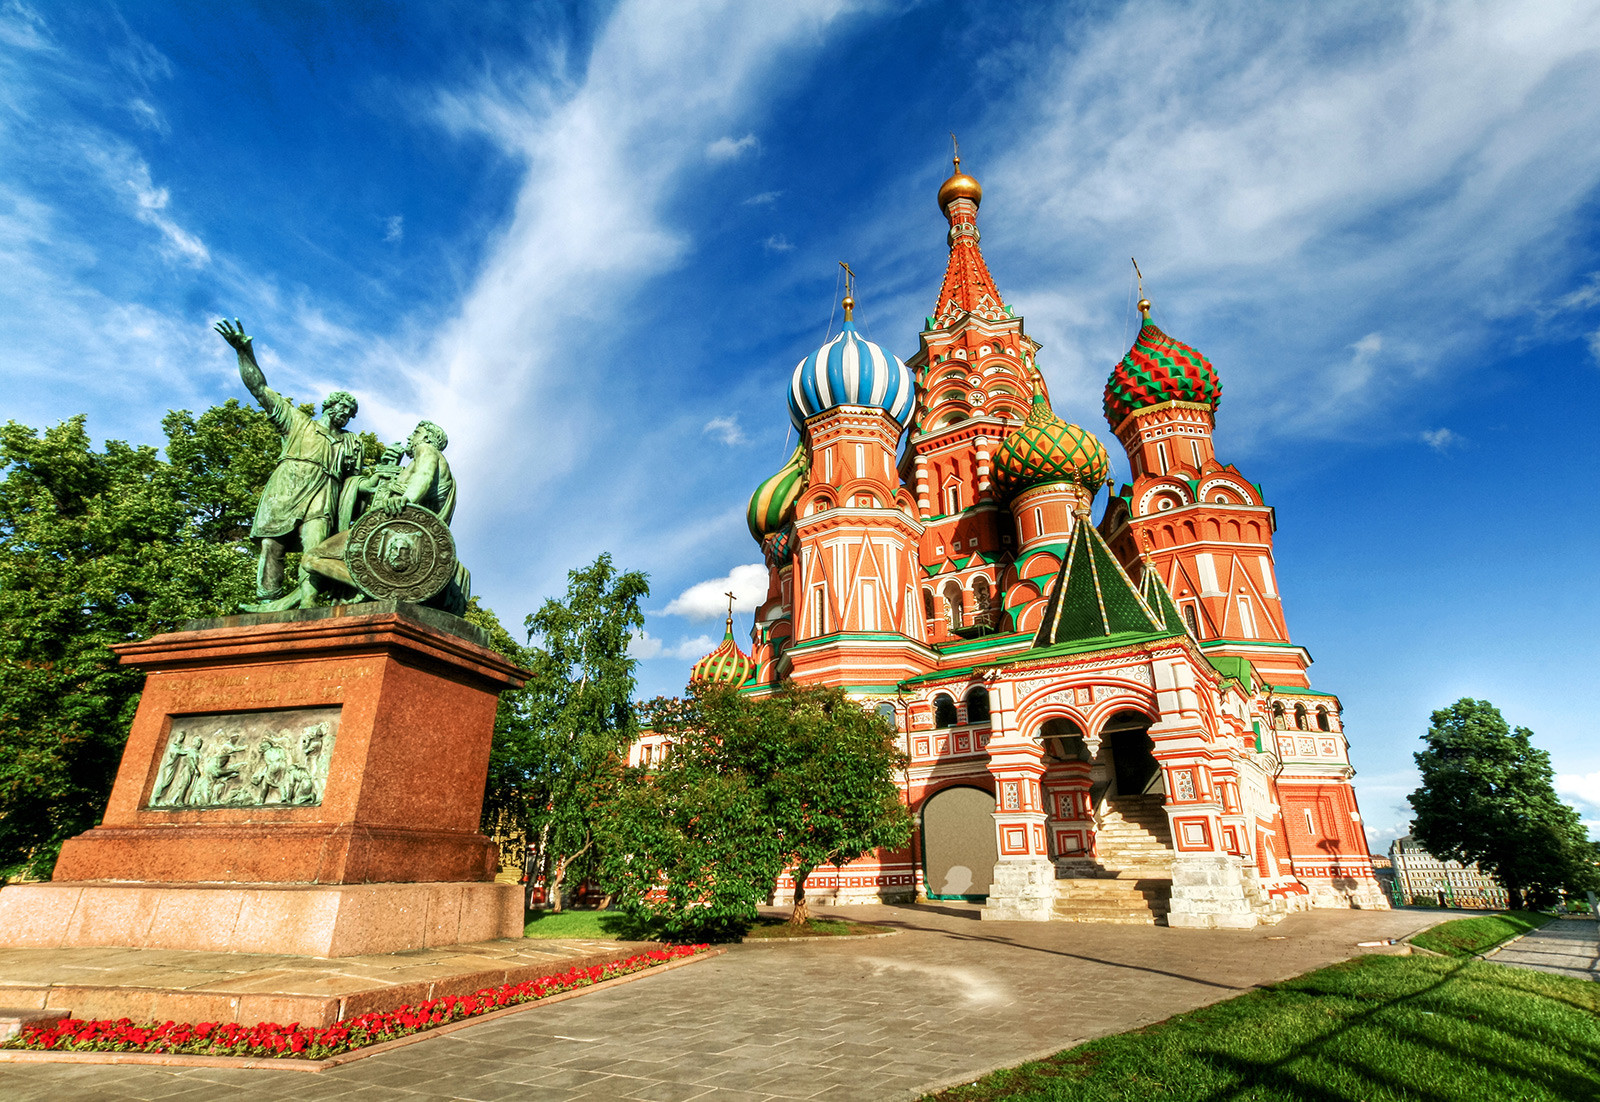 top 3 places to visit in russia